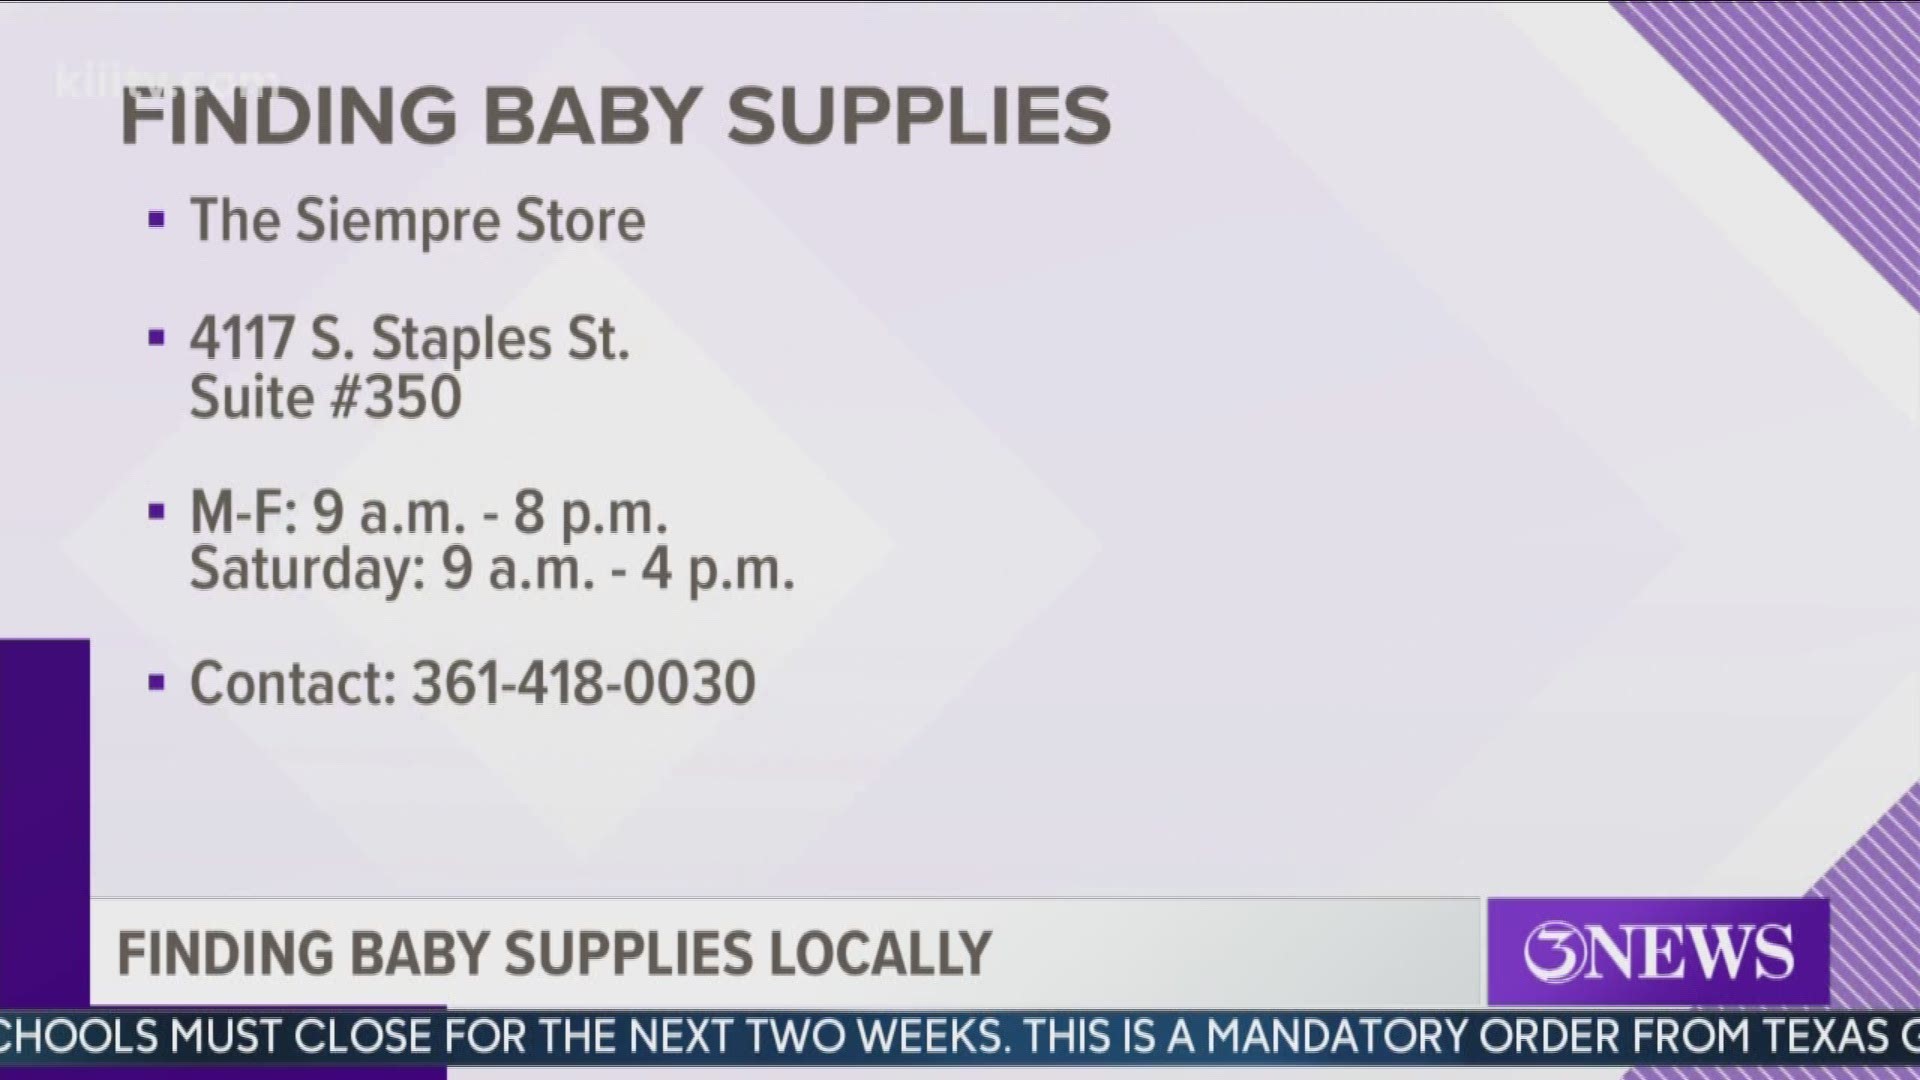 If you are in the Nueces County area and are in need of baby supplies, you may be able to obtain these products from the Siempre Store.